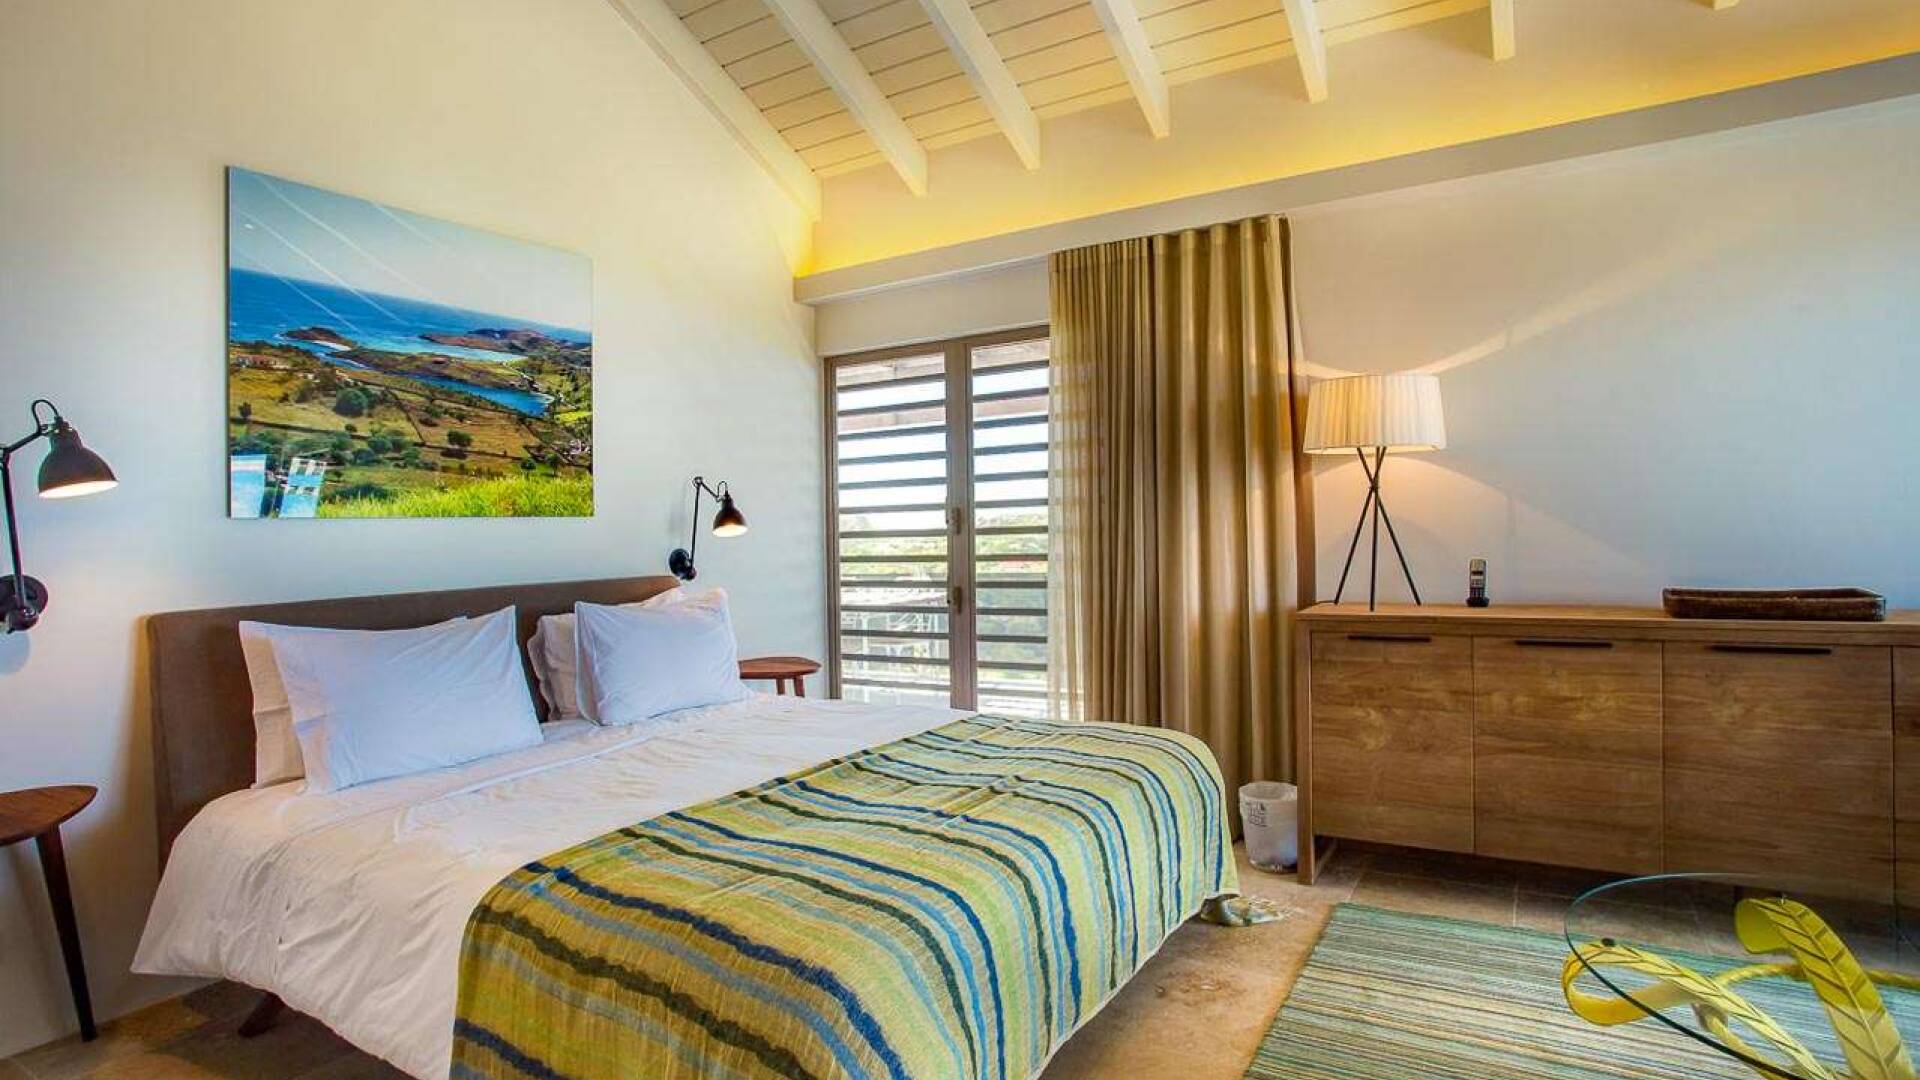 Bedroom at WV YEB, Pointe Milou, St. Barthelemy